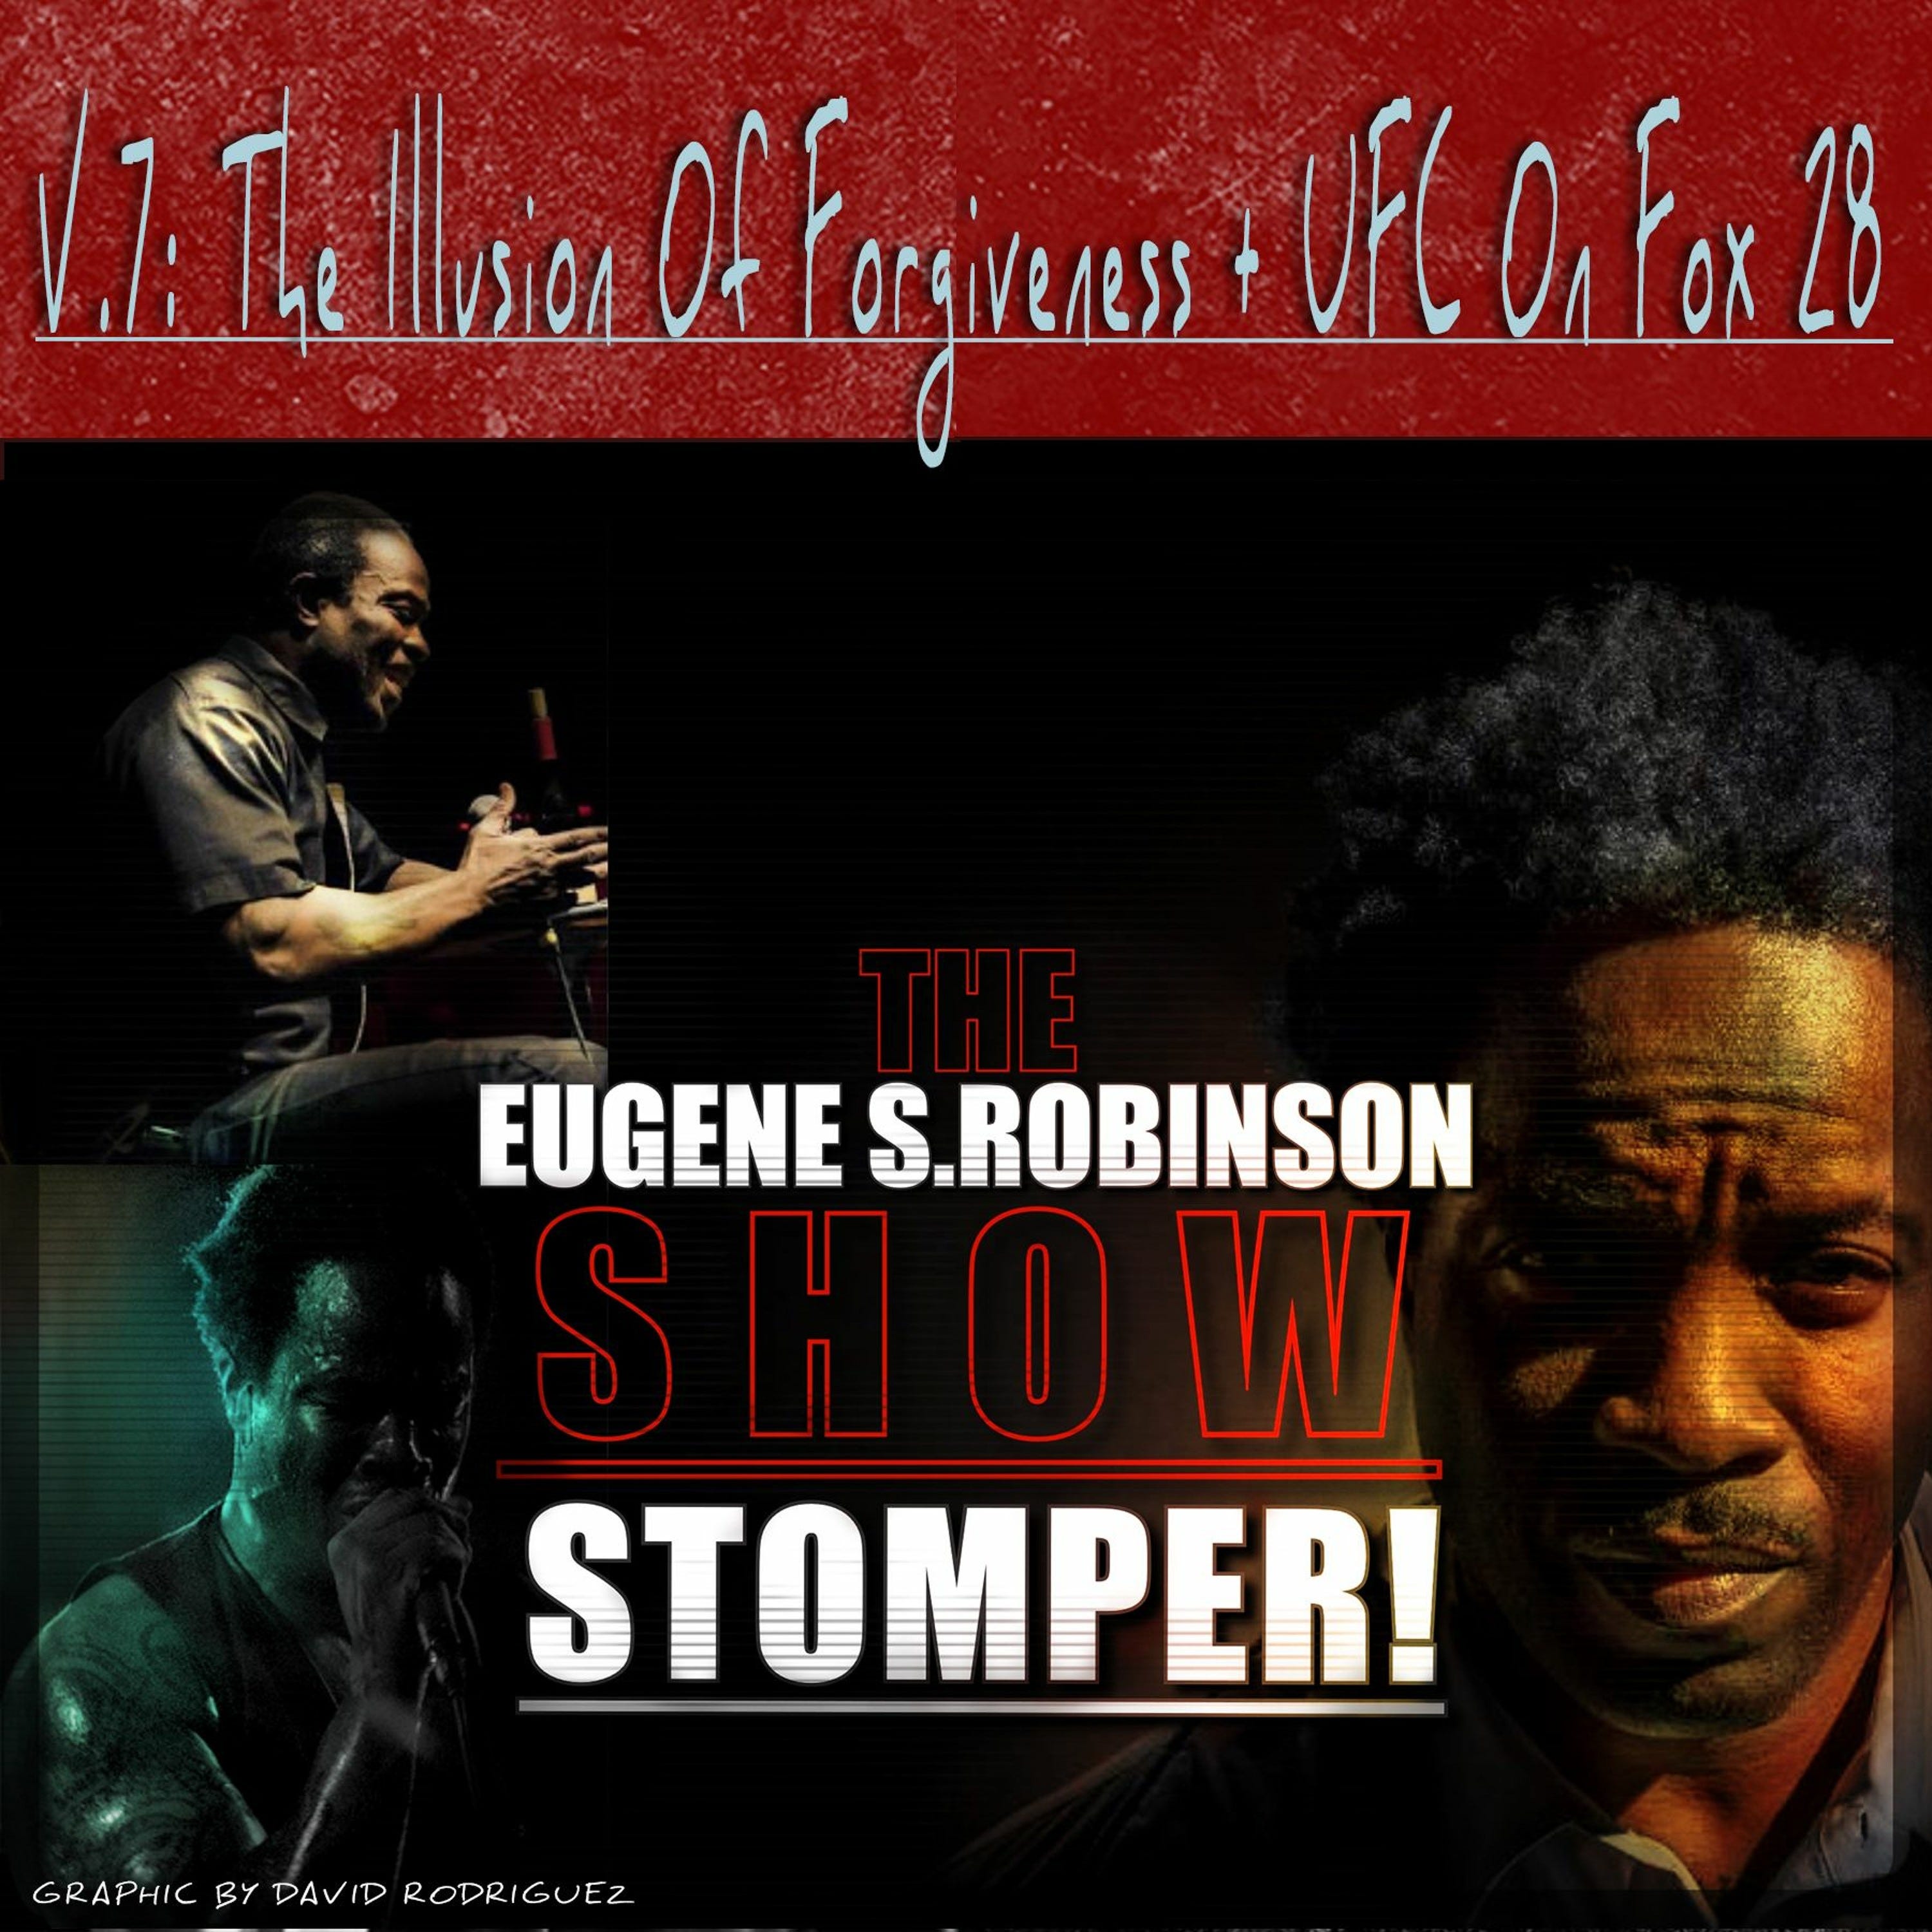 The Eugene S. Robinson Show Stomper! - V.7: The Illusion Of Forgiveness + UFC On Fox 28